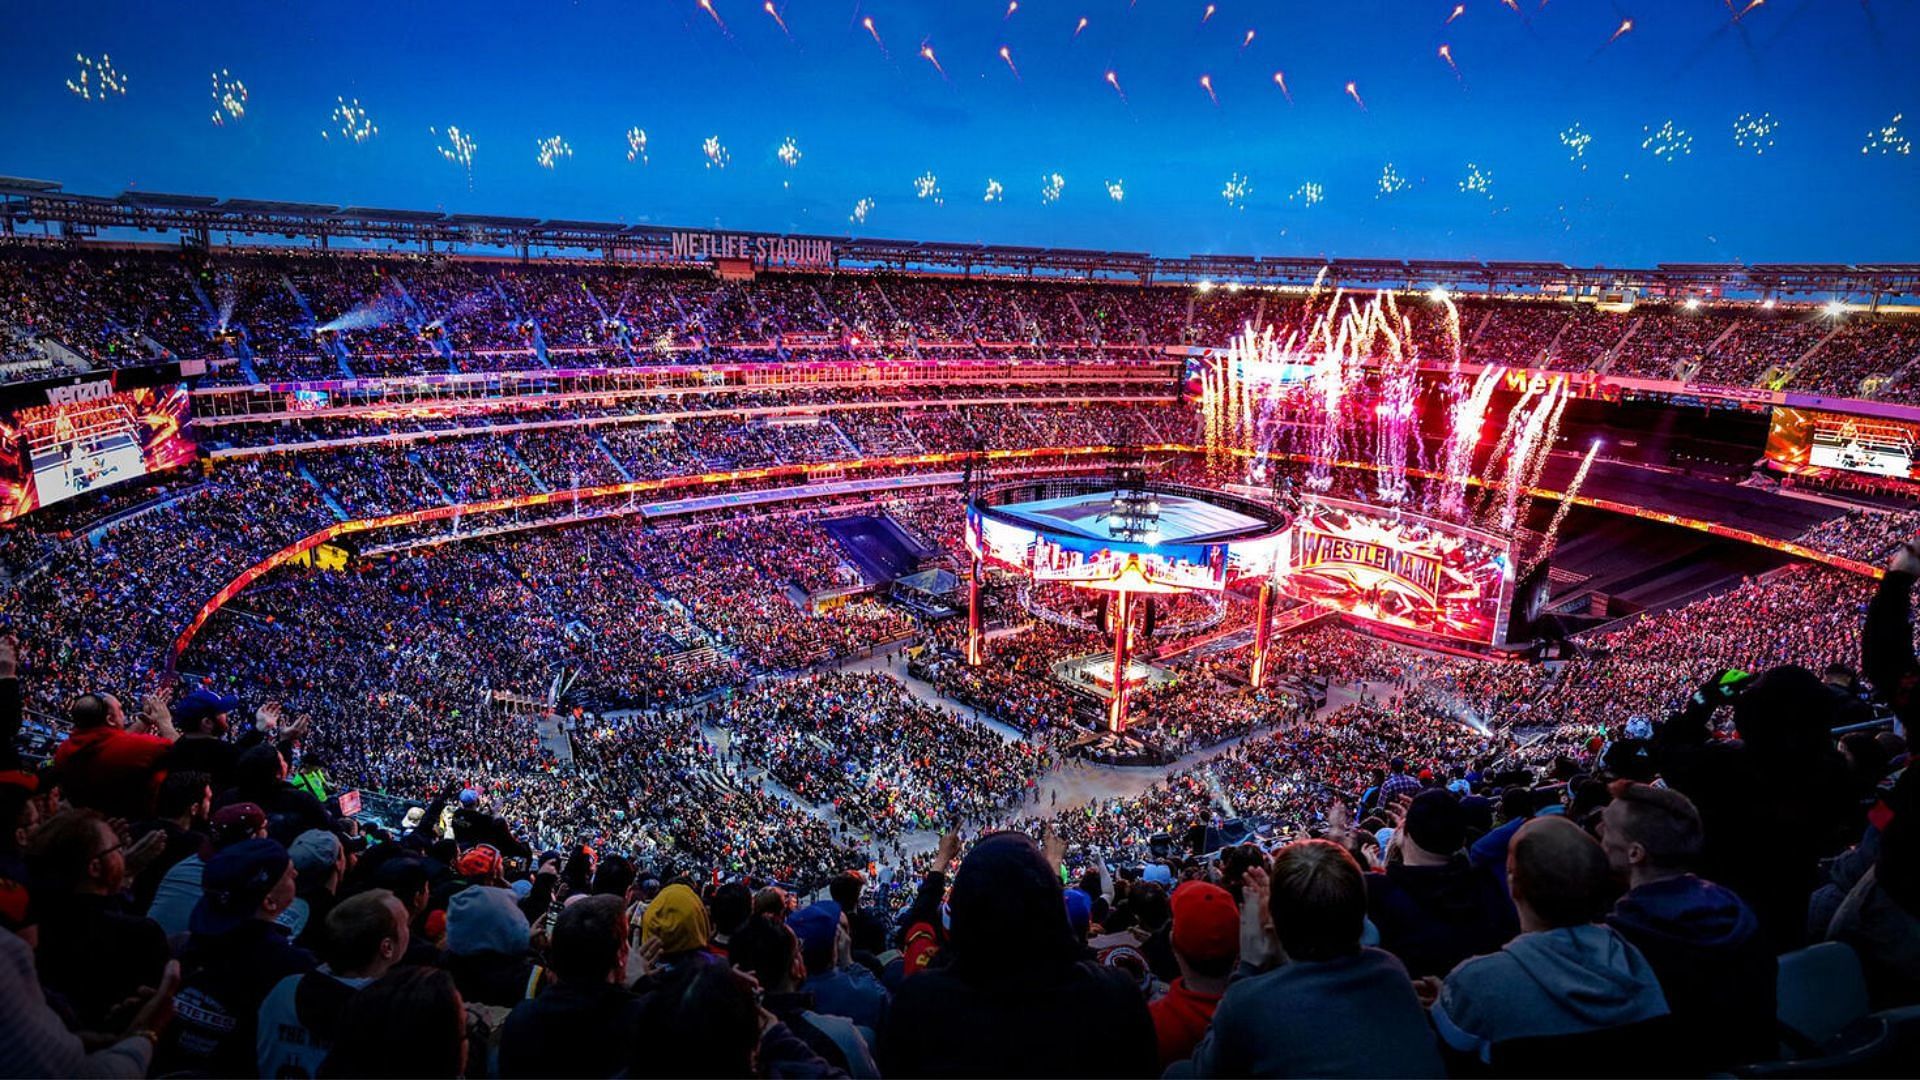 WrestleMania 40 is set to take place on April 6th and 7th 